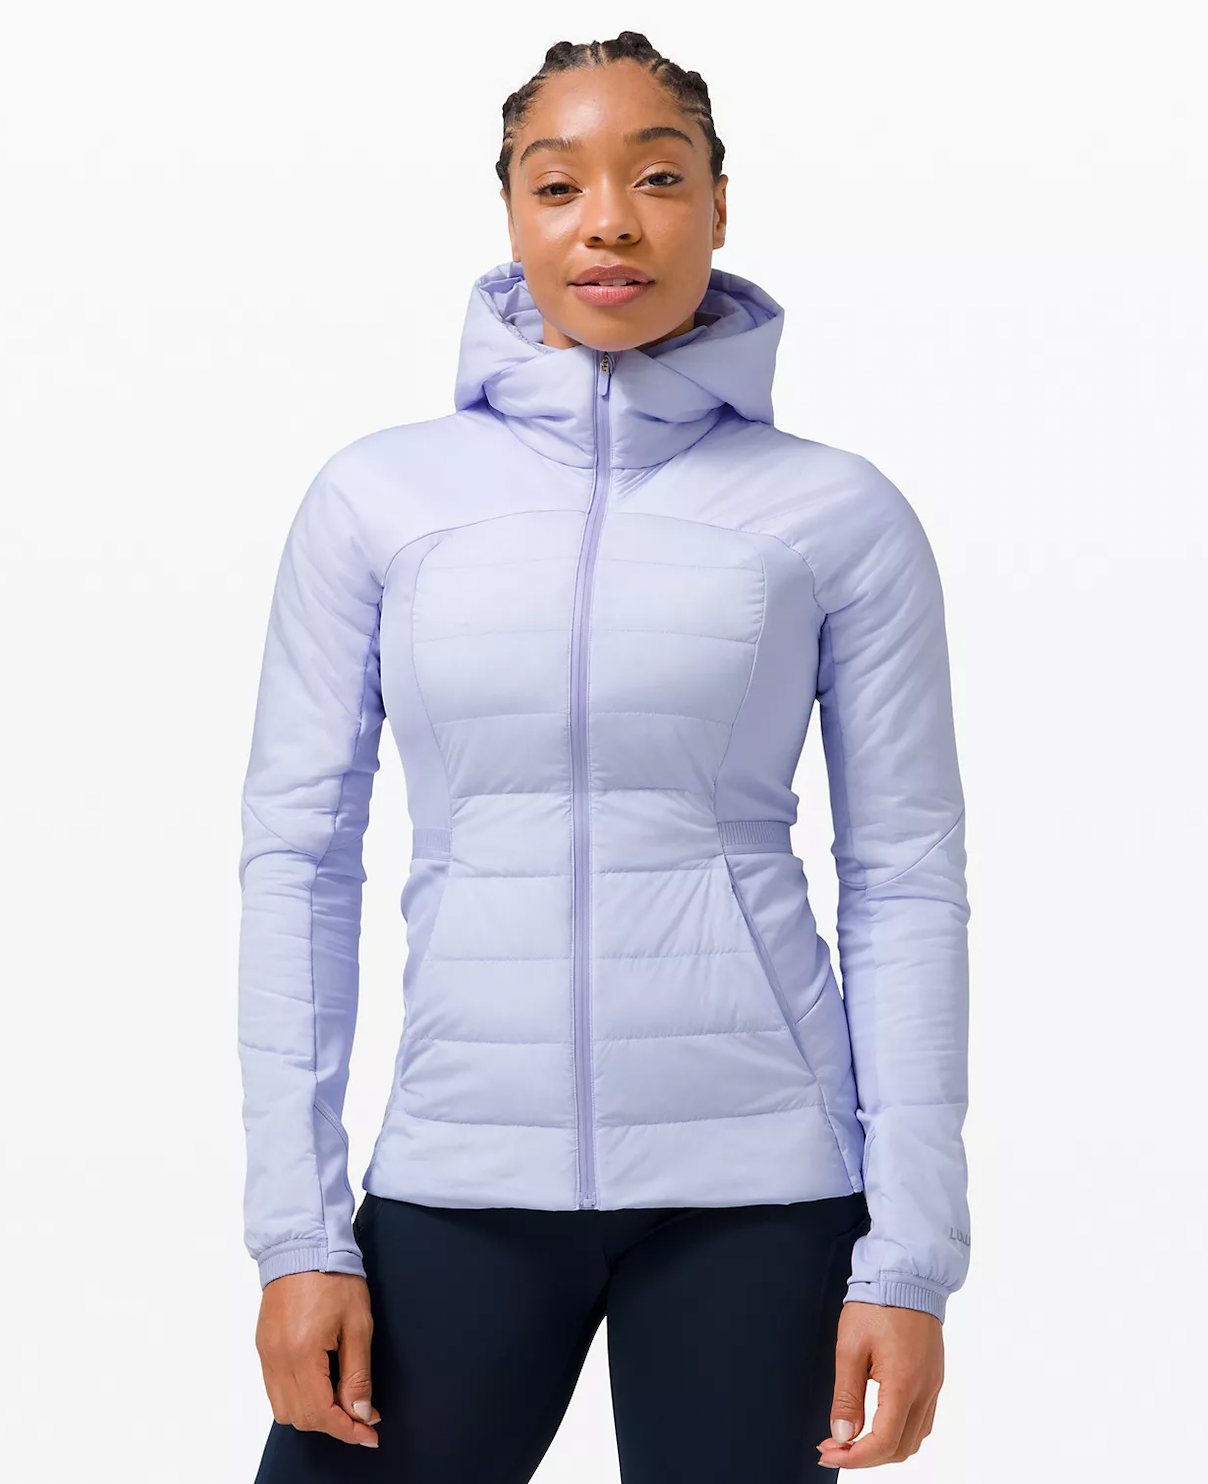 Down for It All Jacket by Lululemon